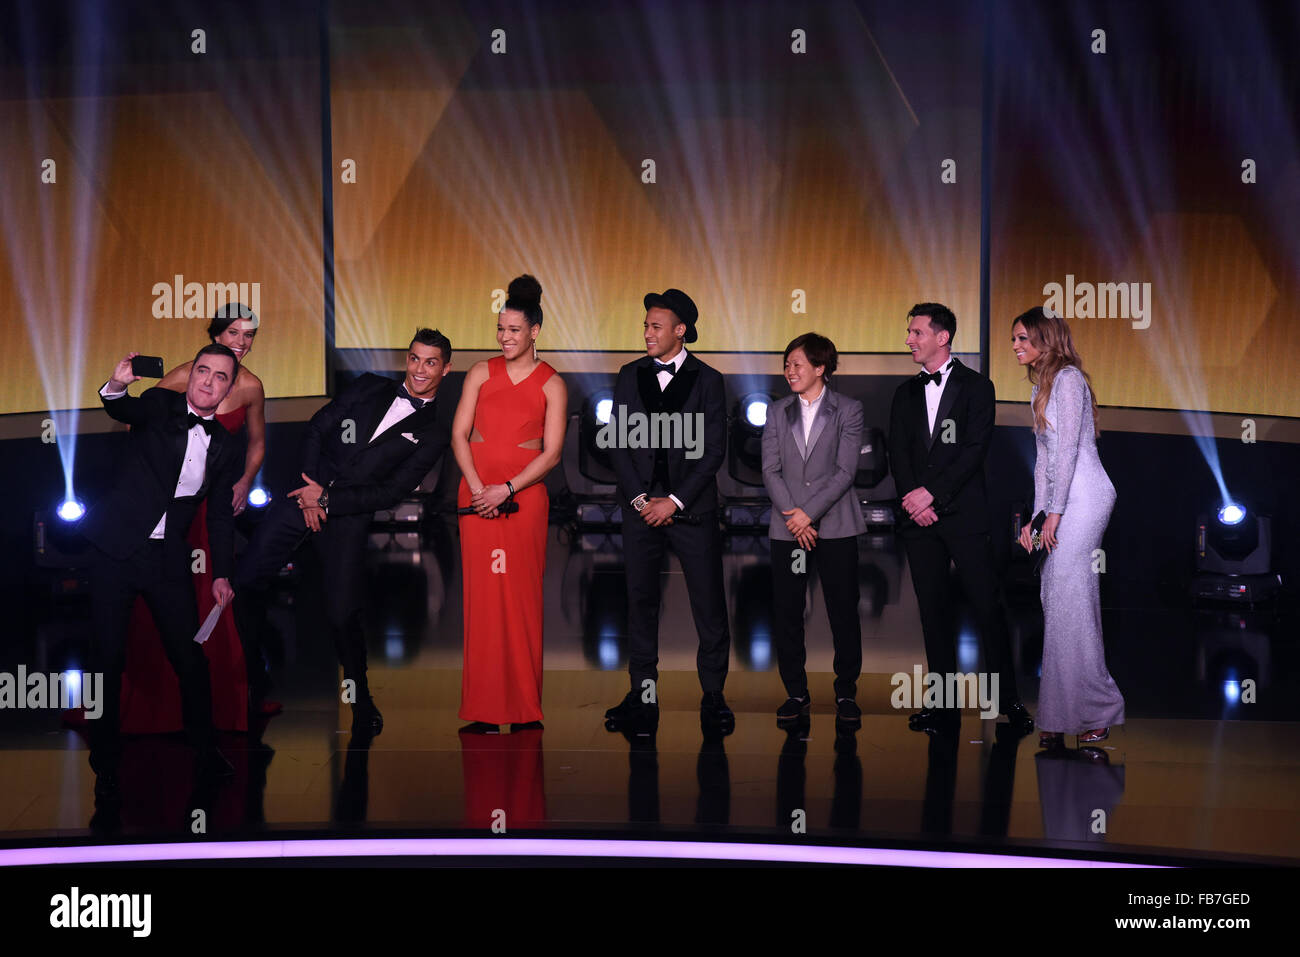 Zurich, Switzerland. 11th Jan, 2016. Presenter of the show James Nesbitt (L) takes a selfie with (L-R) Carli Lloyd of the USA and Houston Dash, Cristiano Ronaldo of Portugal and Real Madrid, Celia Sasic of Germany, Brazil's Neymar, Aya Miyama of Japan, Barcelona's Lionel Messi of Argentina and presenter Kate Abdo during the FIFA Ballon d'Or Gala 2015 held at the Kongresshaus in Zurich, Switzerland, 11 January 2016. Photo: Patrick Seeger/dpa/Alamy Live News Stock Photo